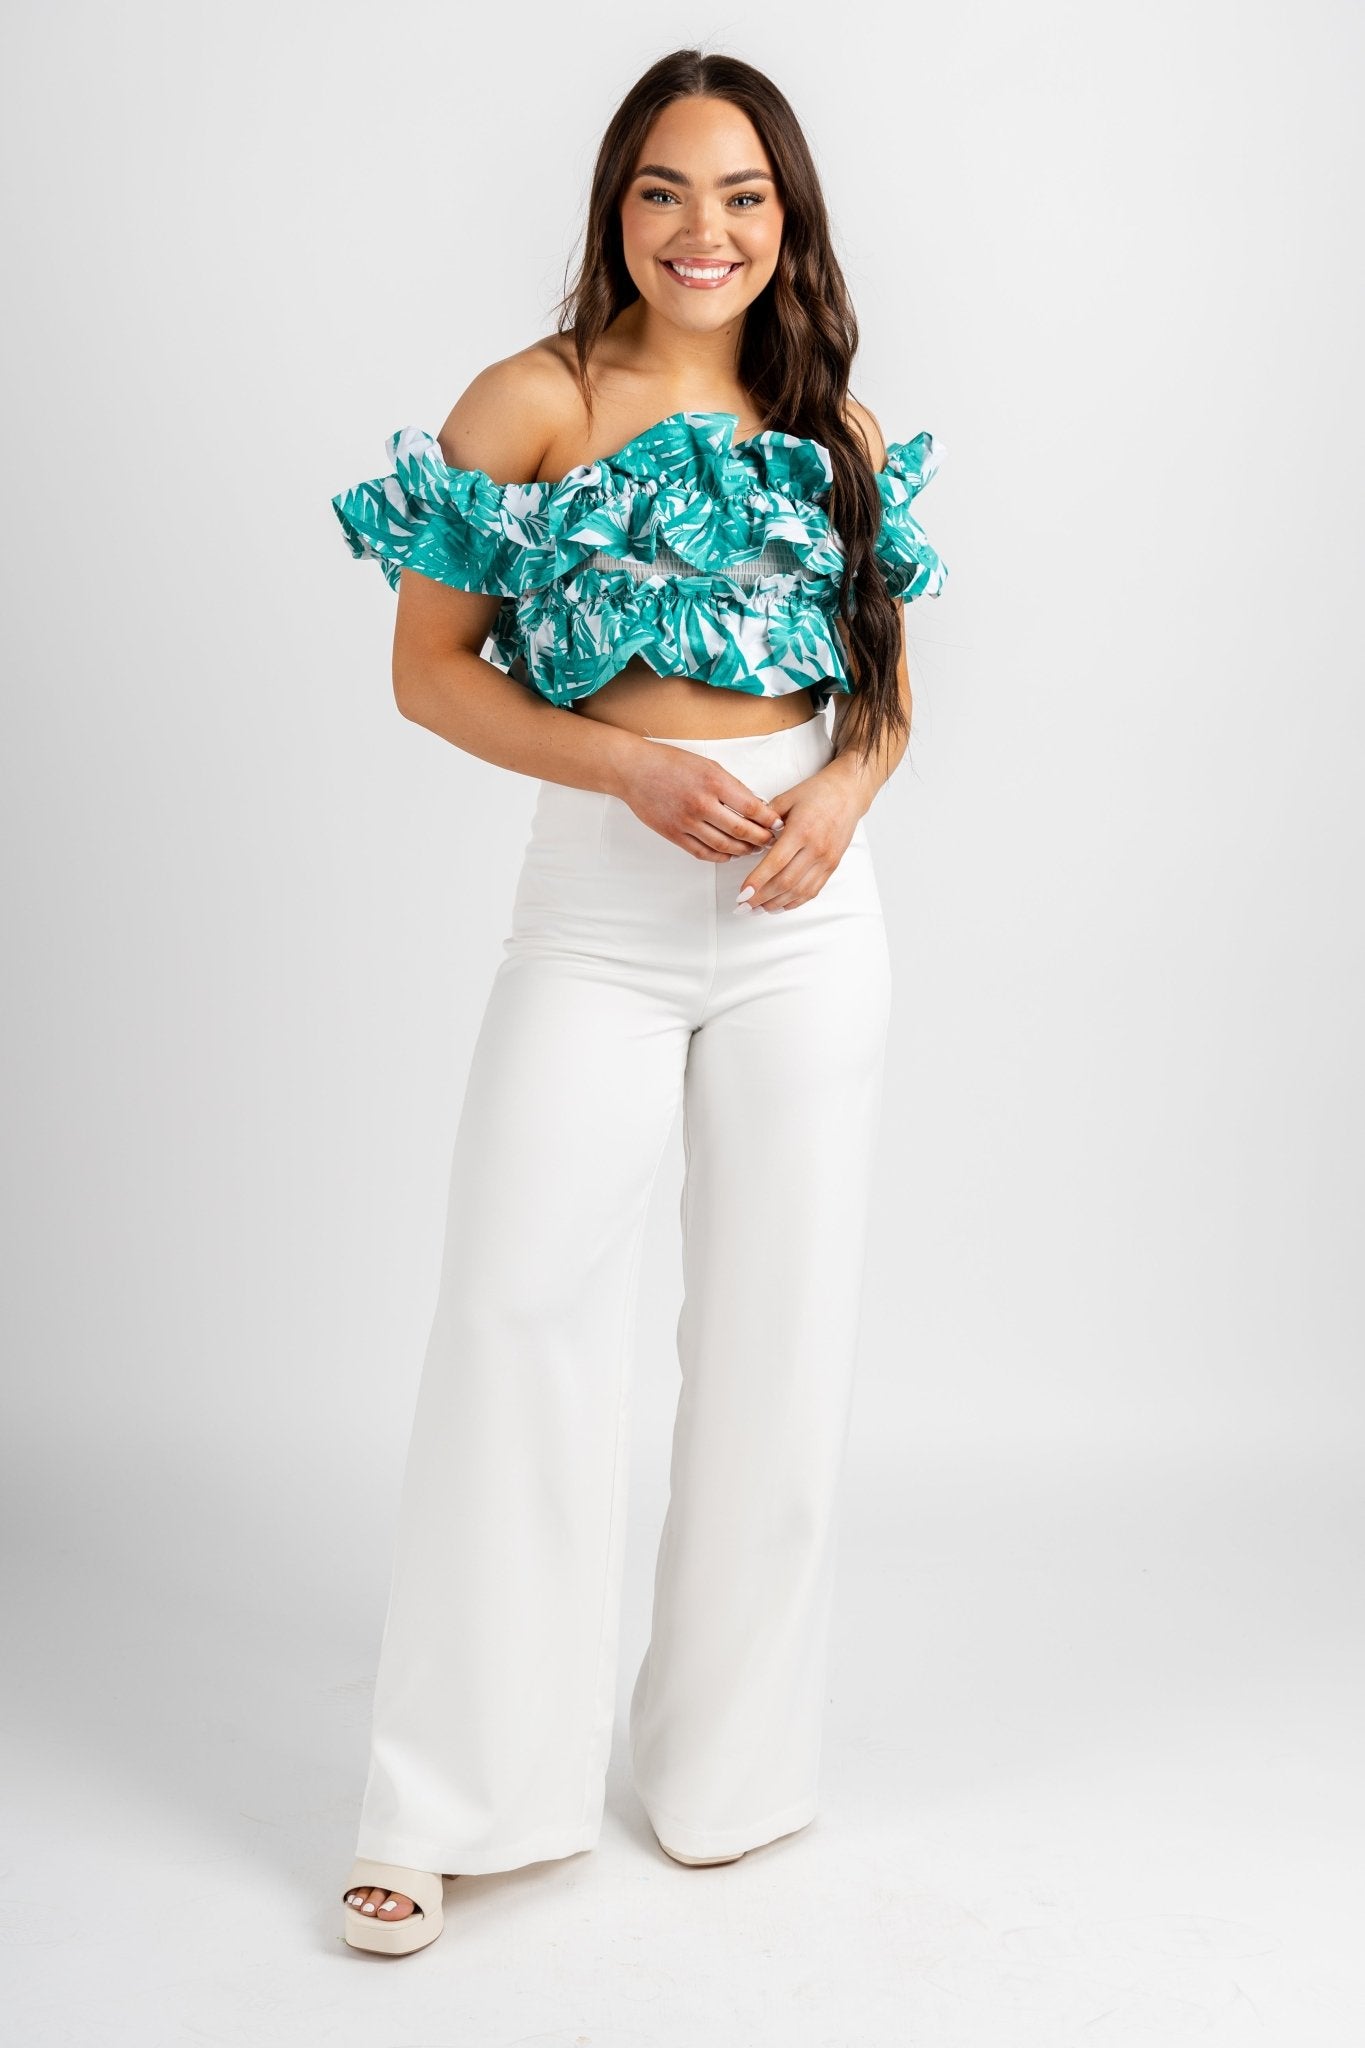 Ruffle print top summer green - Stylish Top - Trendy Staycation Outfits at Lush Fashion Lounge Boutique in Oklahoma City